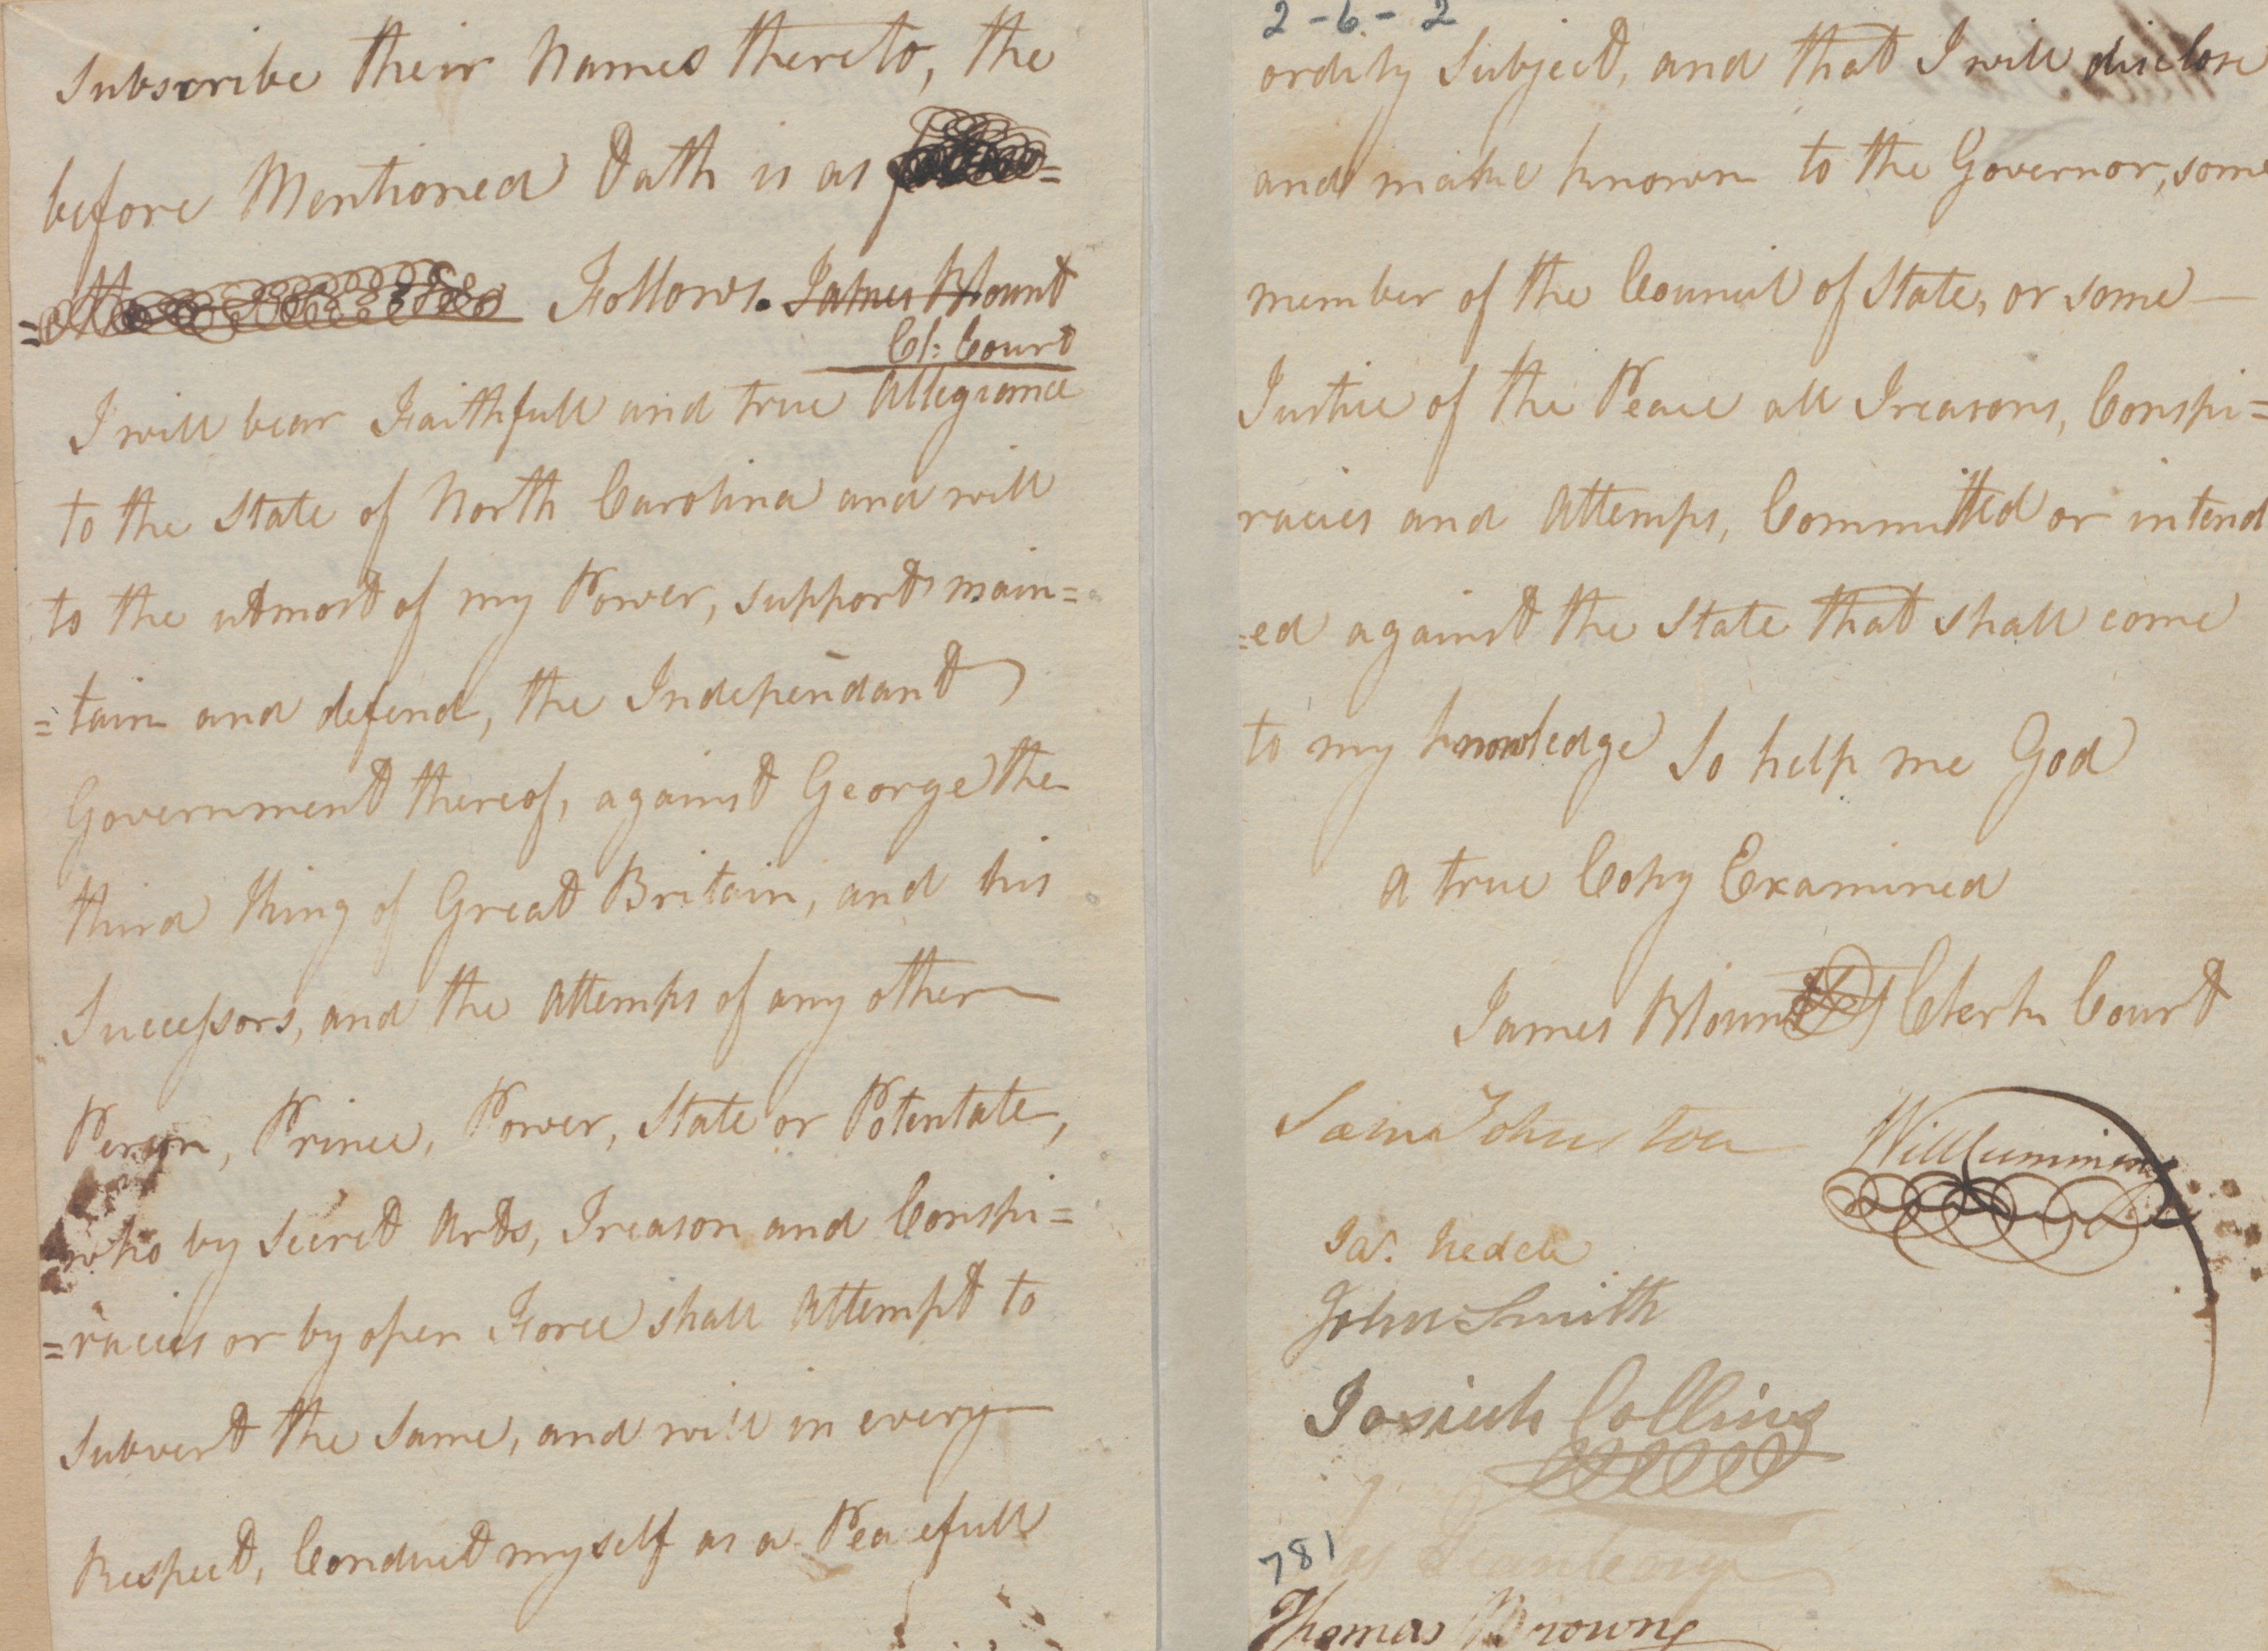 Order of the Chowan County Court, 17 June 1777, page 2